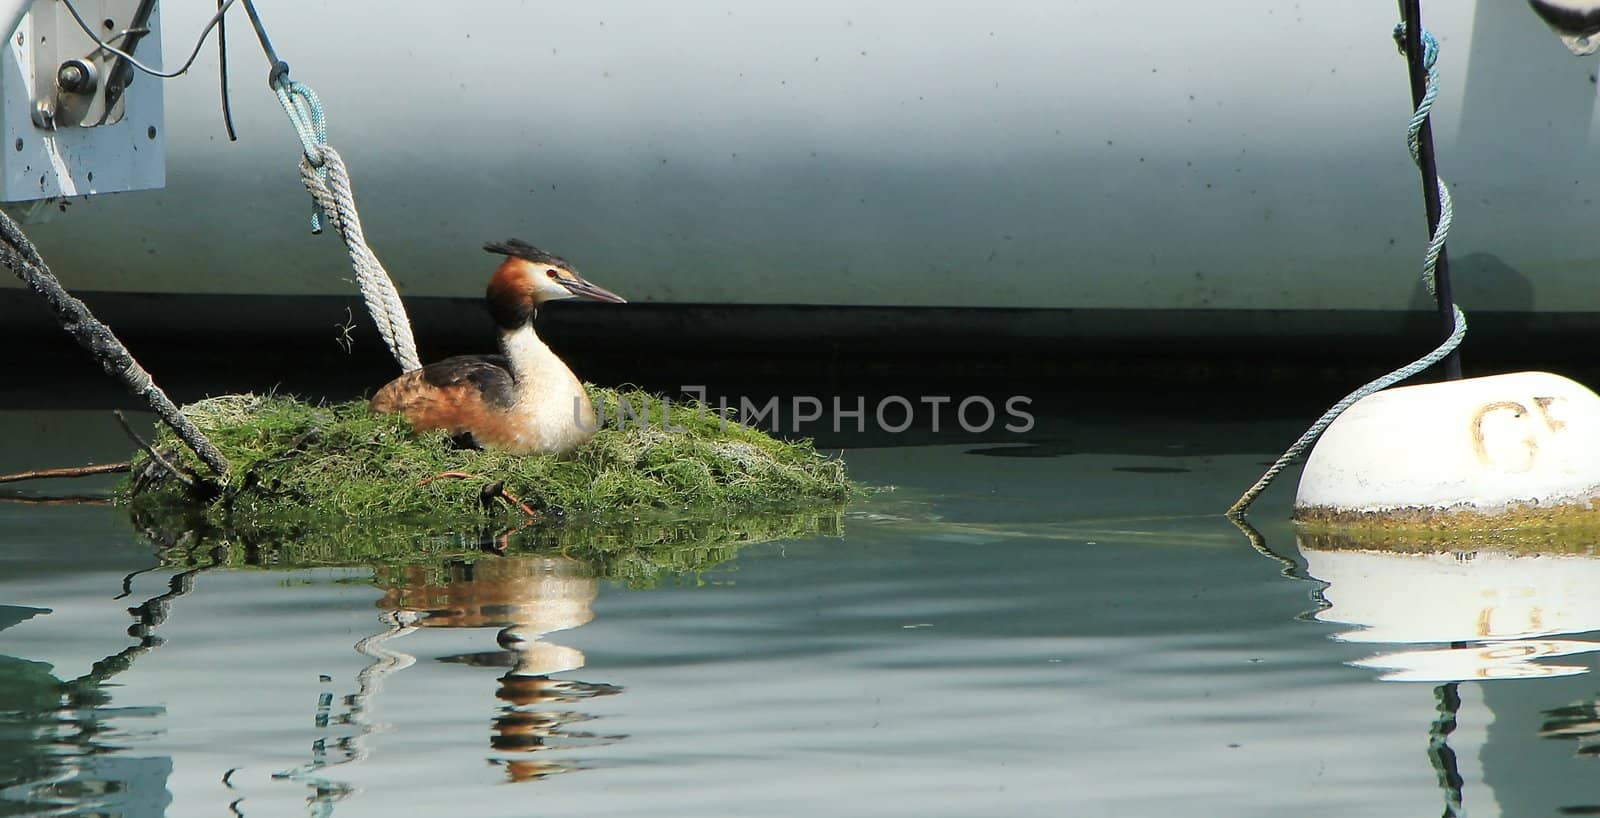 Great Crested Grebe (Podiceps cristatus) by Elenaphotos21